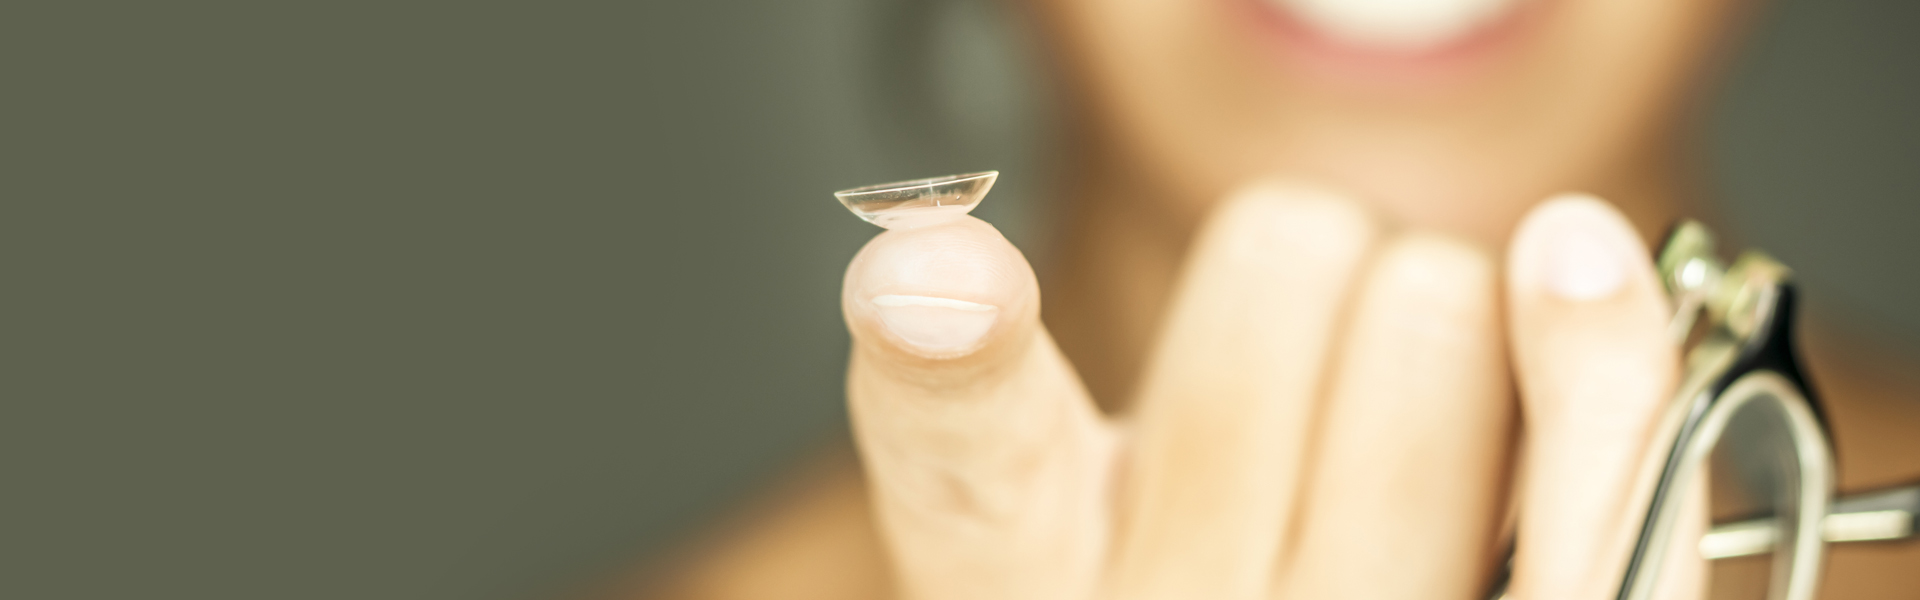 Importance of Contact Lens Examination